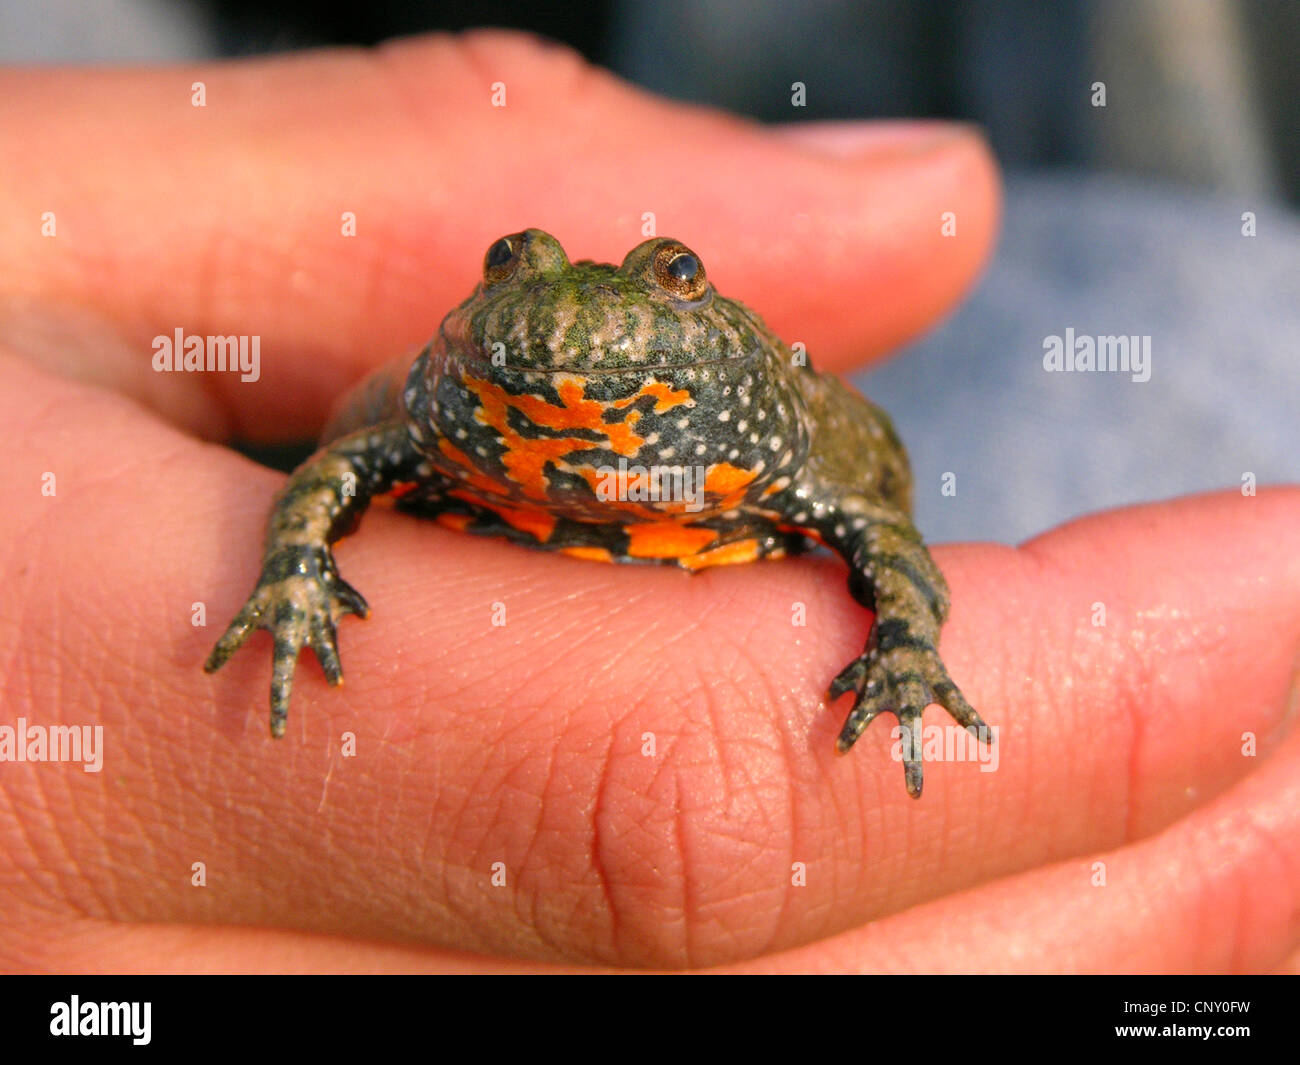 fire-bellied toad (Bombina bombina), in the hand of a child, Germany Stock Photo